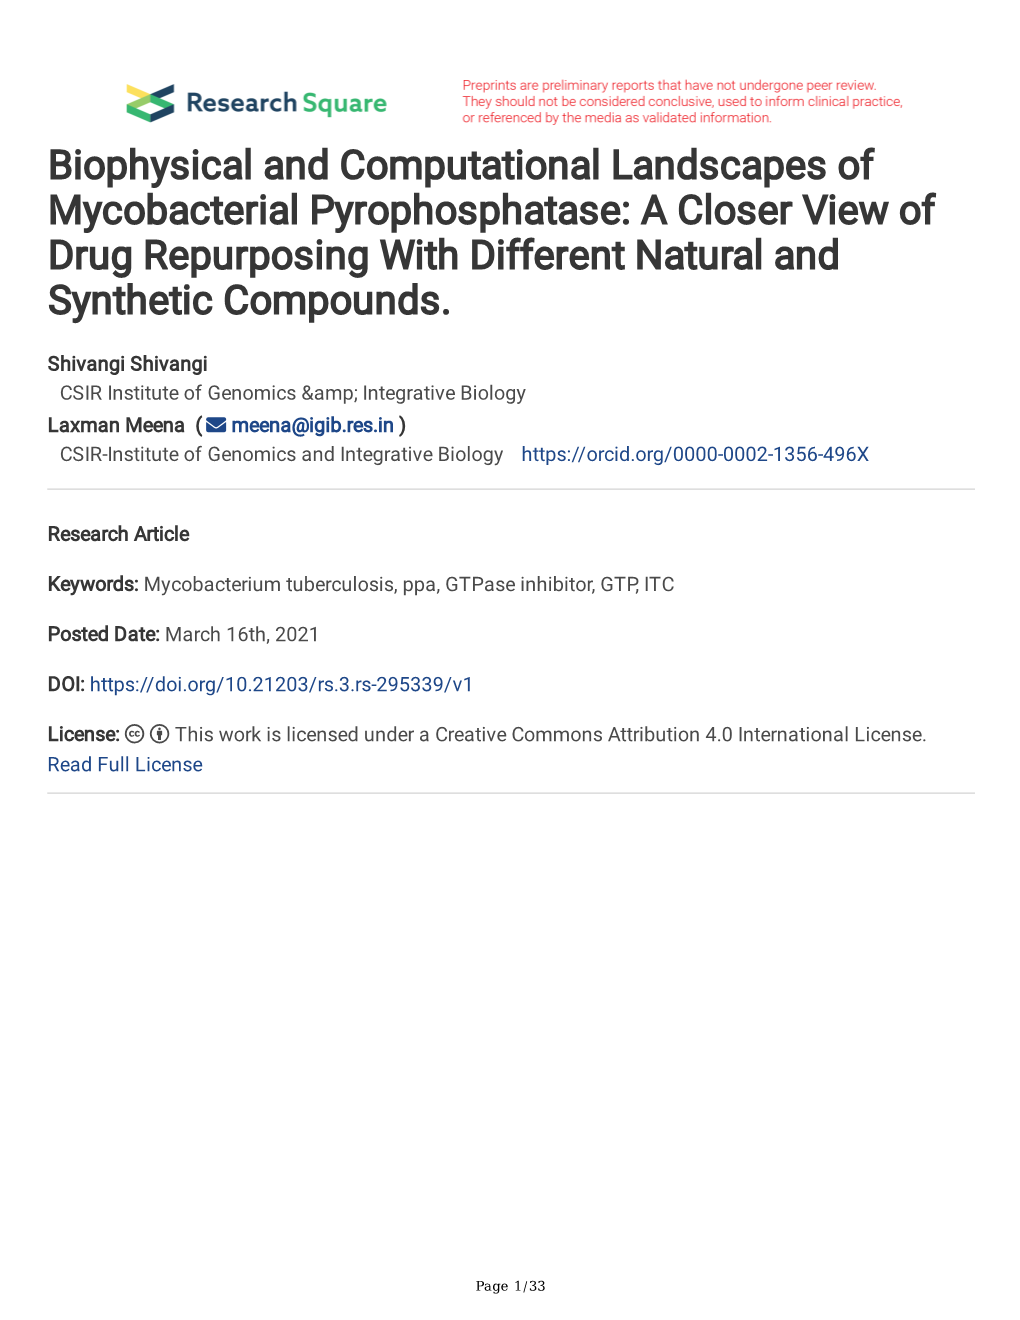 Biophysical and Computational Landscapes of Mycobacterial Pyrophosphatase: a Closer View of Drug Repurposing with Different Natural and Synthetic Compounds